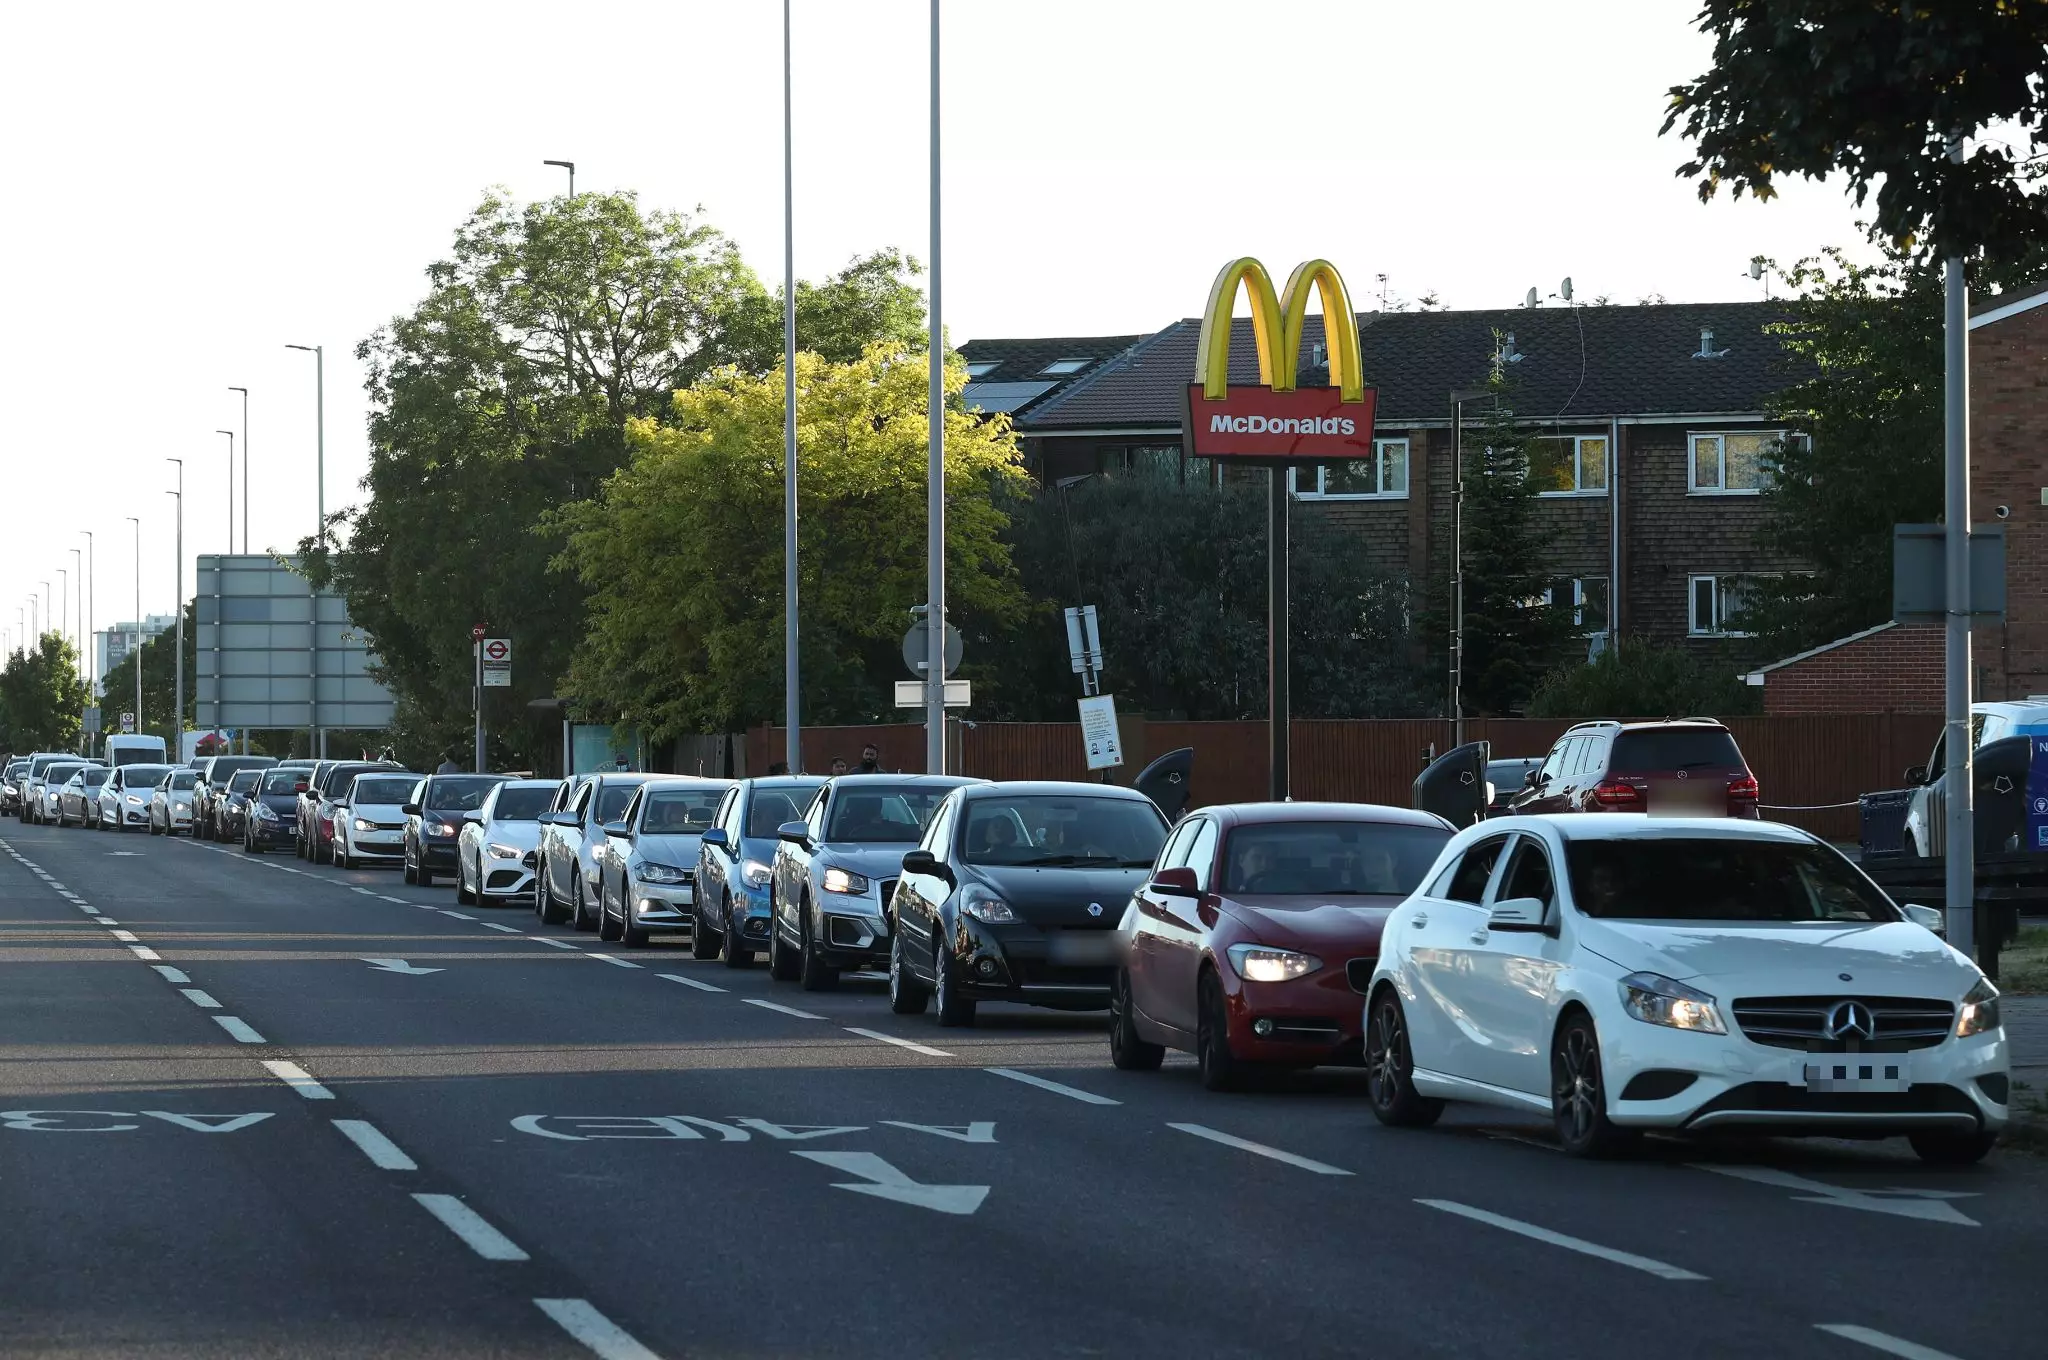 Customers have been itching to get their hands on a Maccies.